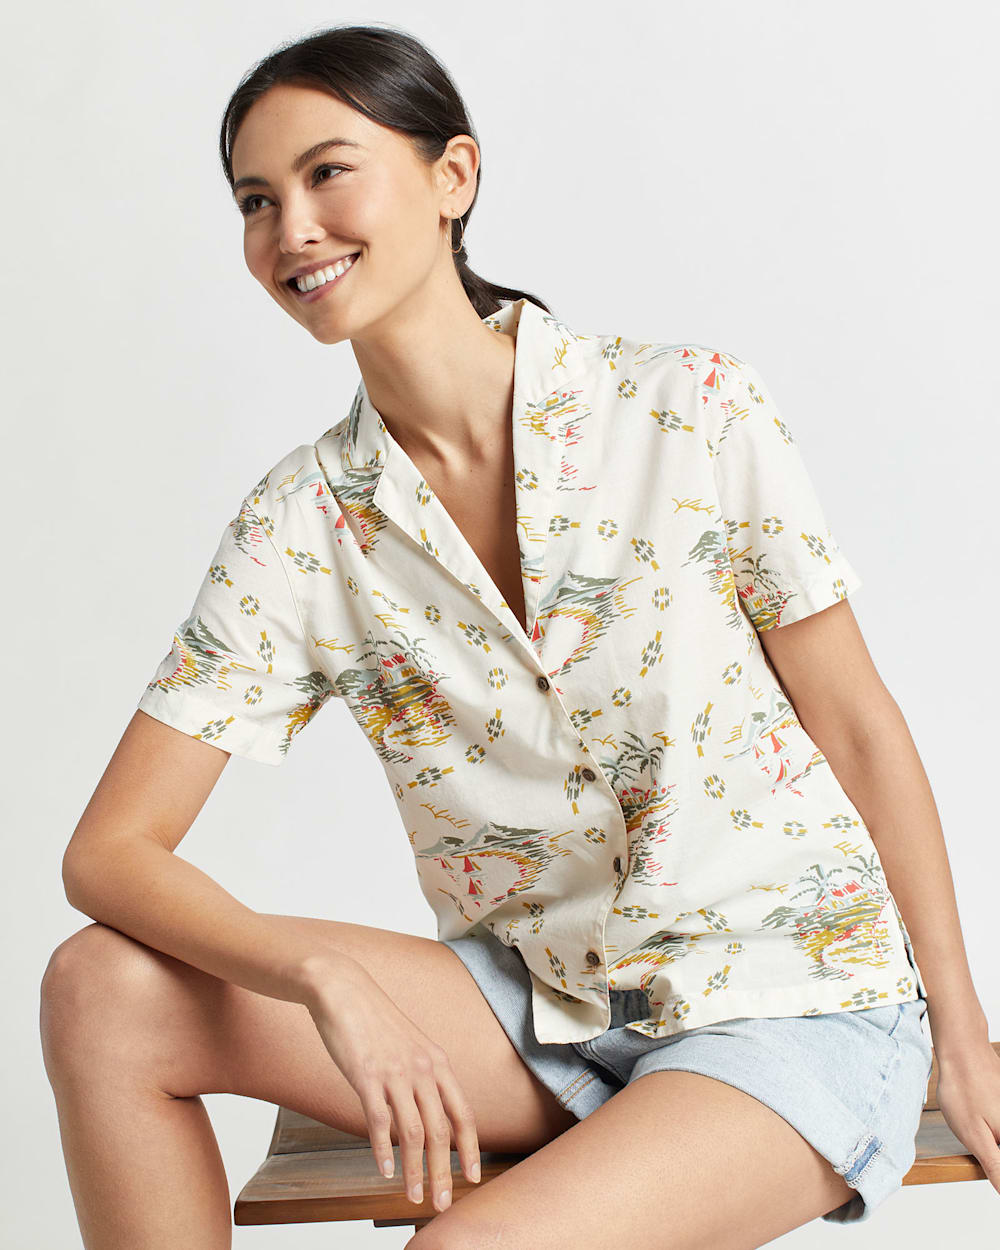 ALTERNATE VIEW OF WOMEN'S SHORT-SLEEVE COTTON CAMP SHIRT IN VINTAGE ISLAND MULTI image number 5